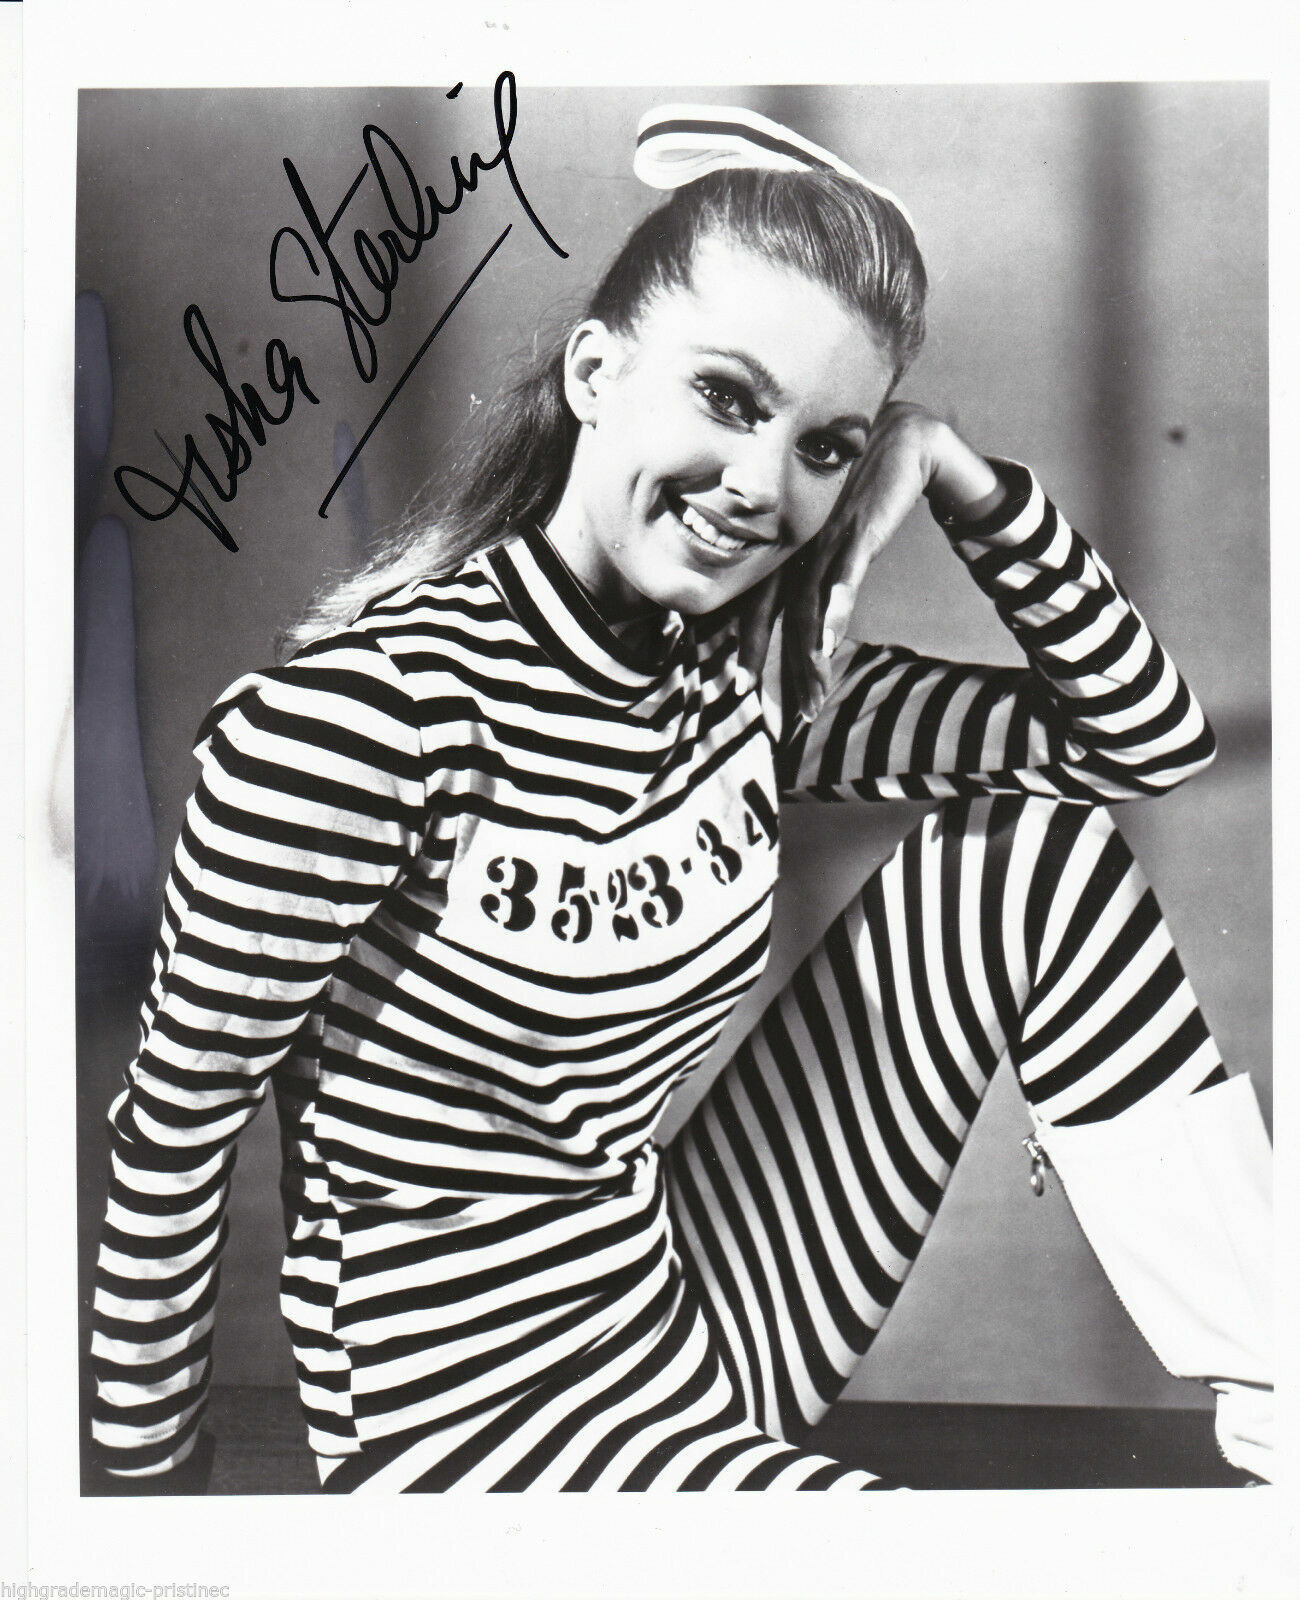 TISHA STERLING AUTOGRAPHED SIGNED 8X10 APPEARED IN BATMAN TV SHOW LEGS PARKER